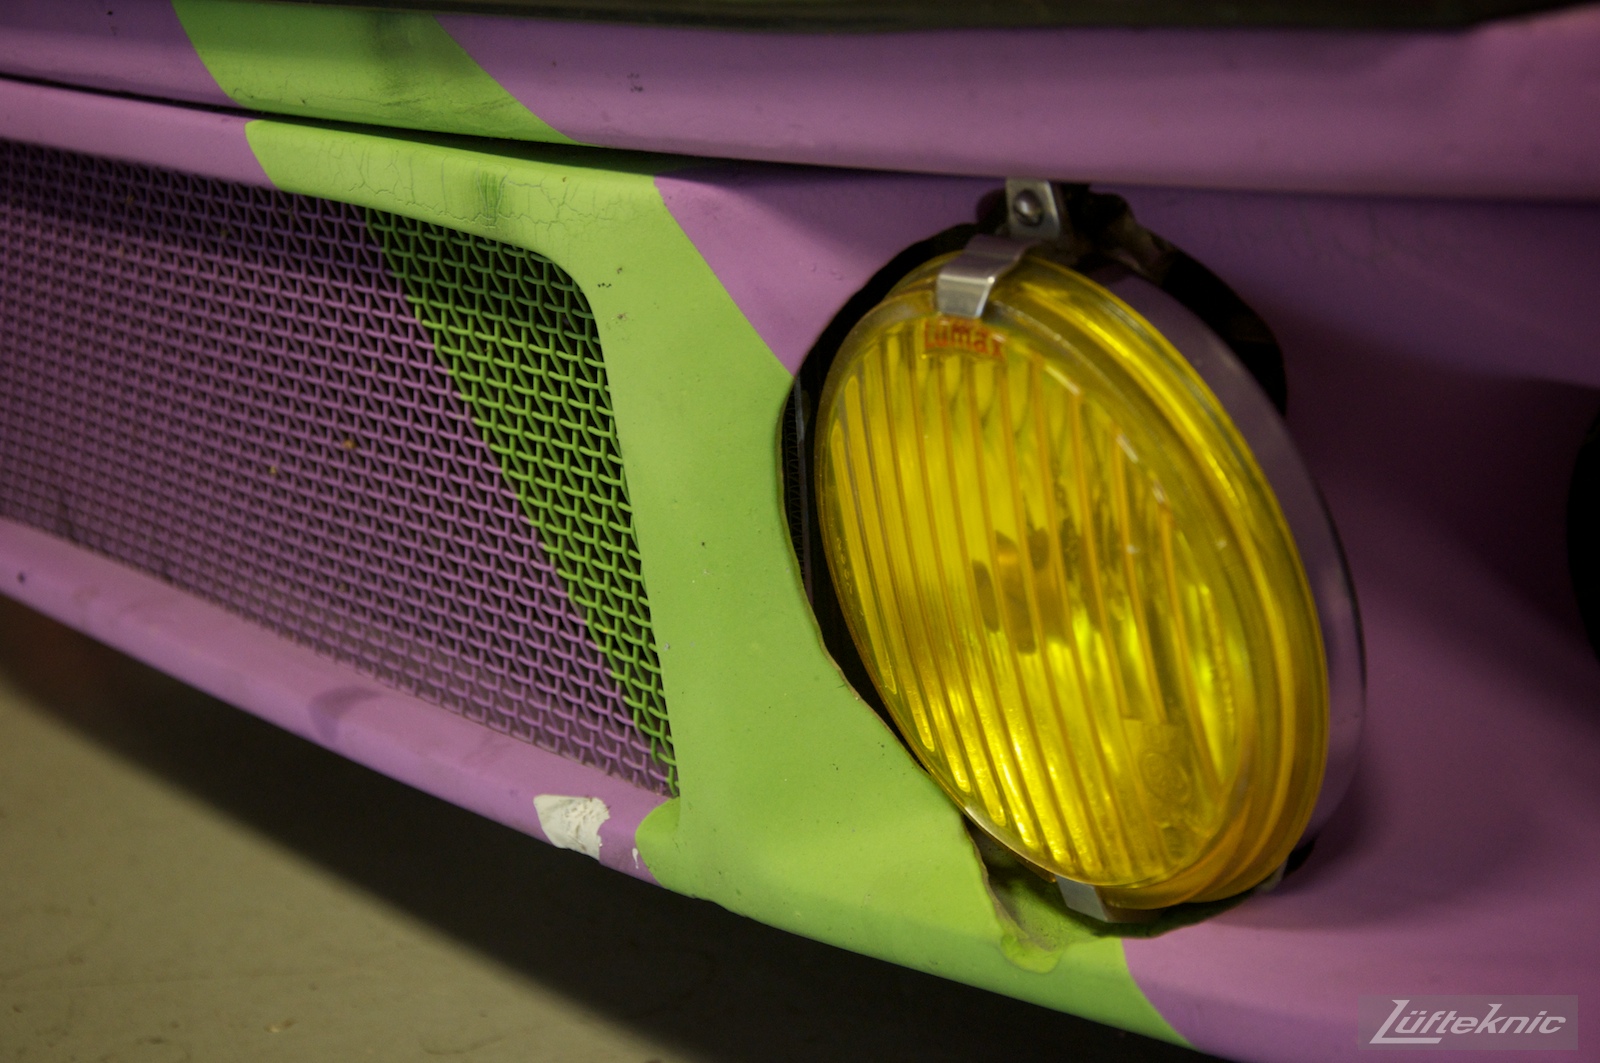 A detail shot of the yellow foglight and bumper damage on the Lüfteknic #projectstuka Porsche 930 Turbo